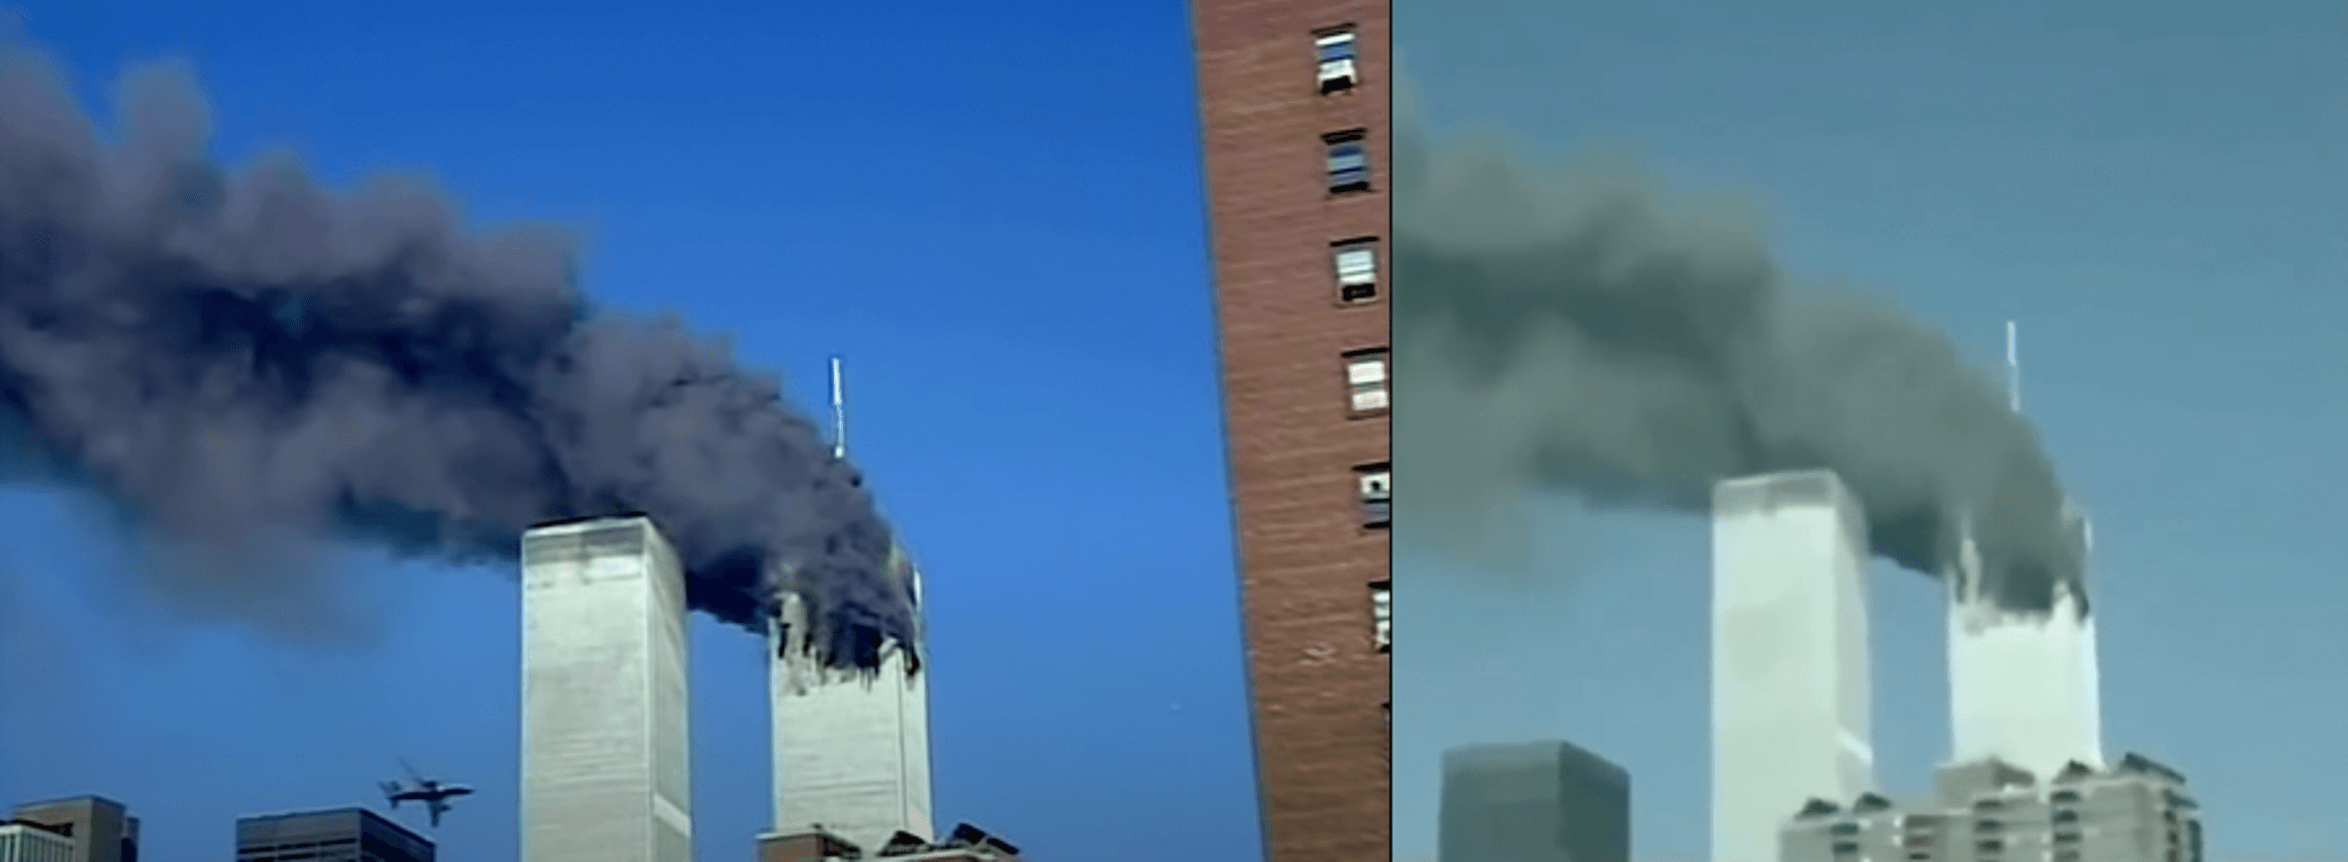 Hoax video falsely purports to show no planes hit Twin Towers on 9/11